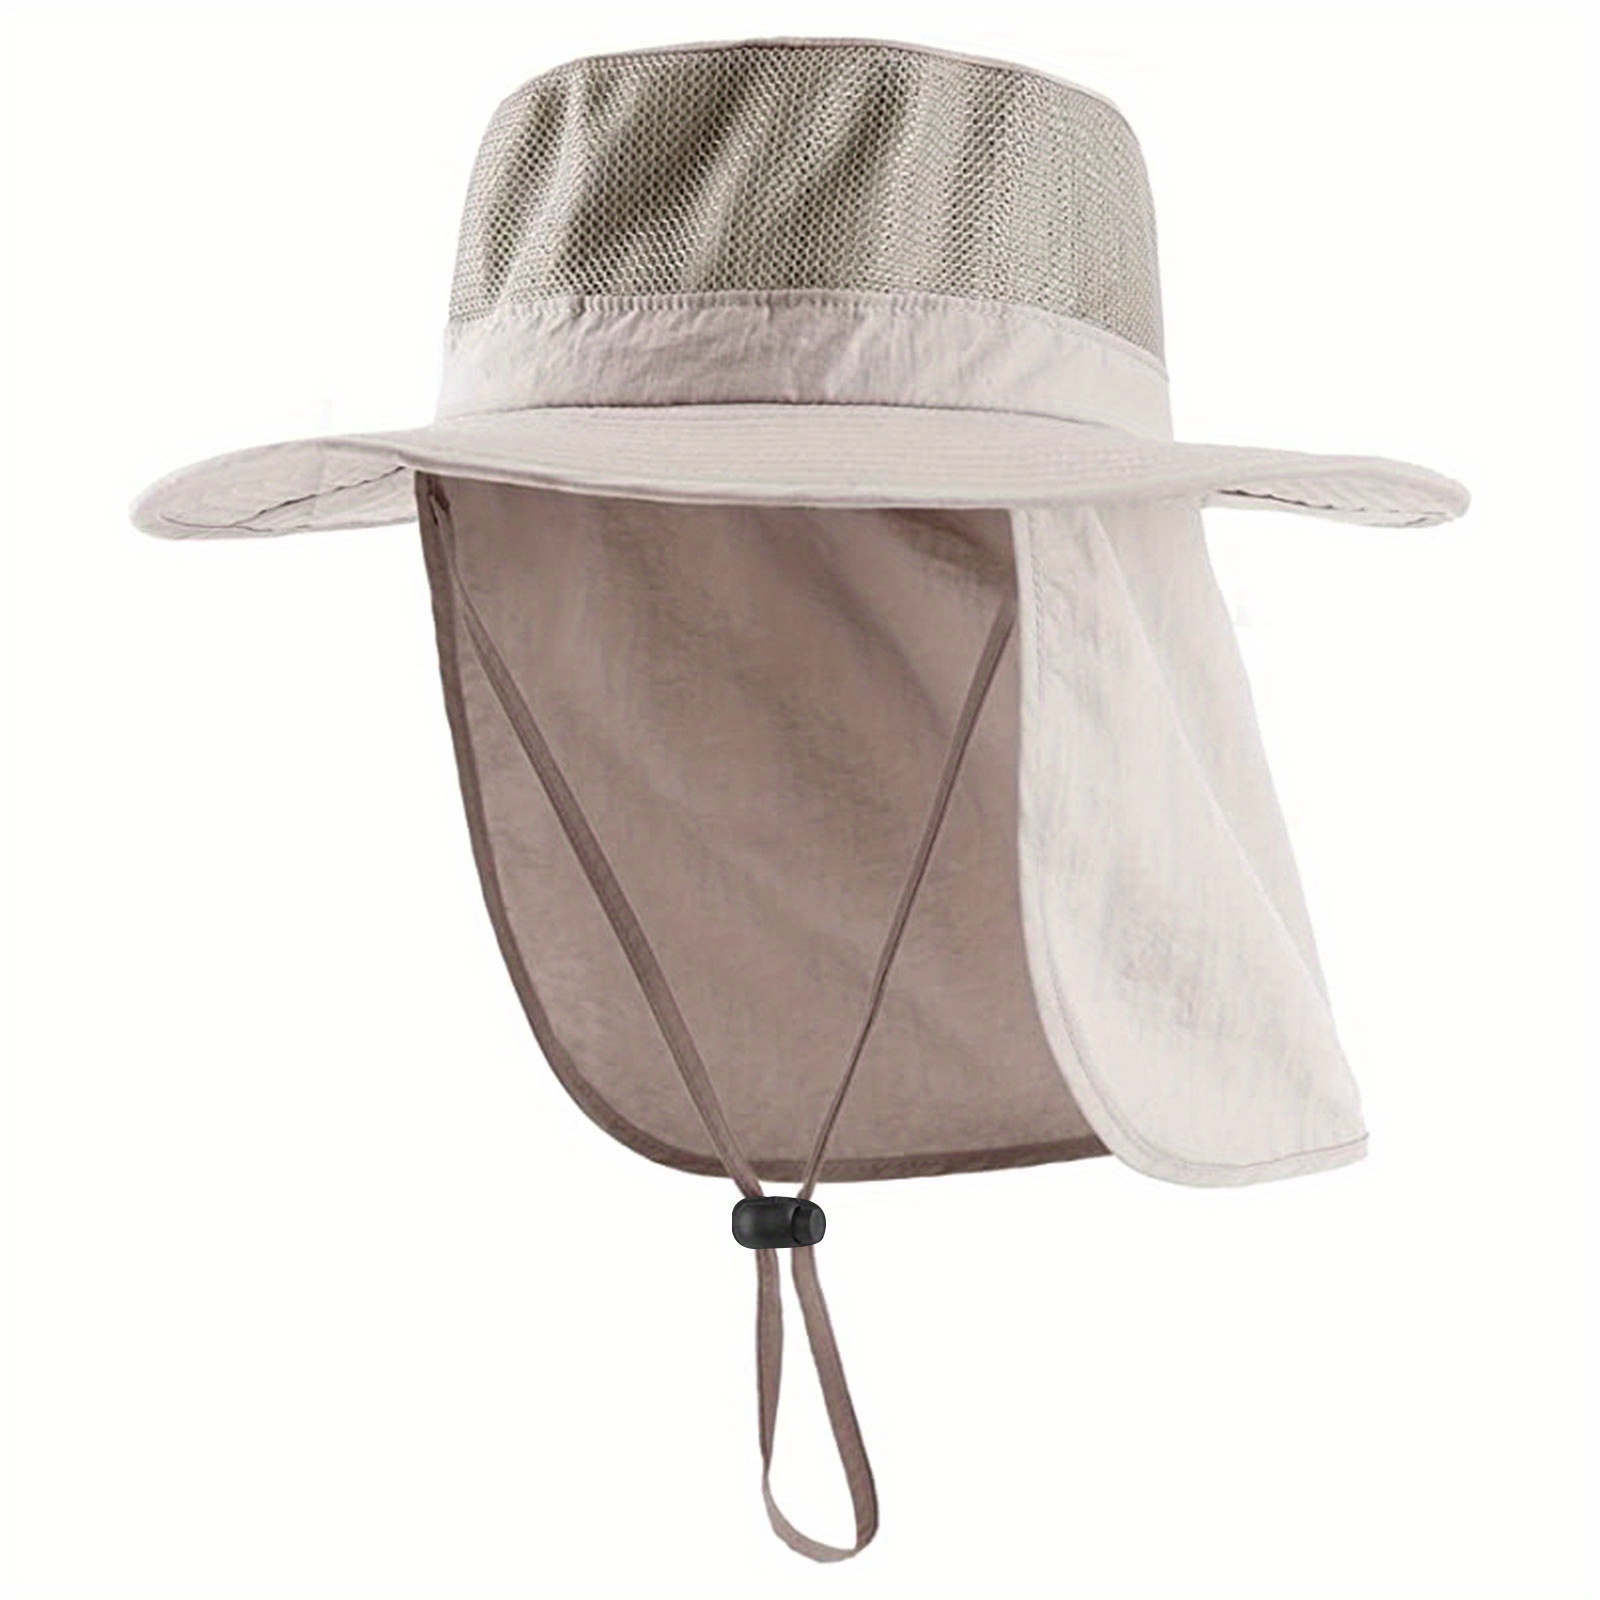 Beige Funky Sun Protection Hat, Men's Hat For Men Wide Brim Hiking Neck Flap Fishing Hat With